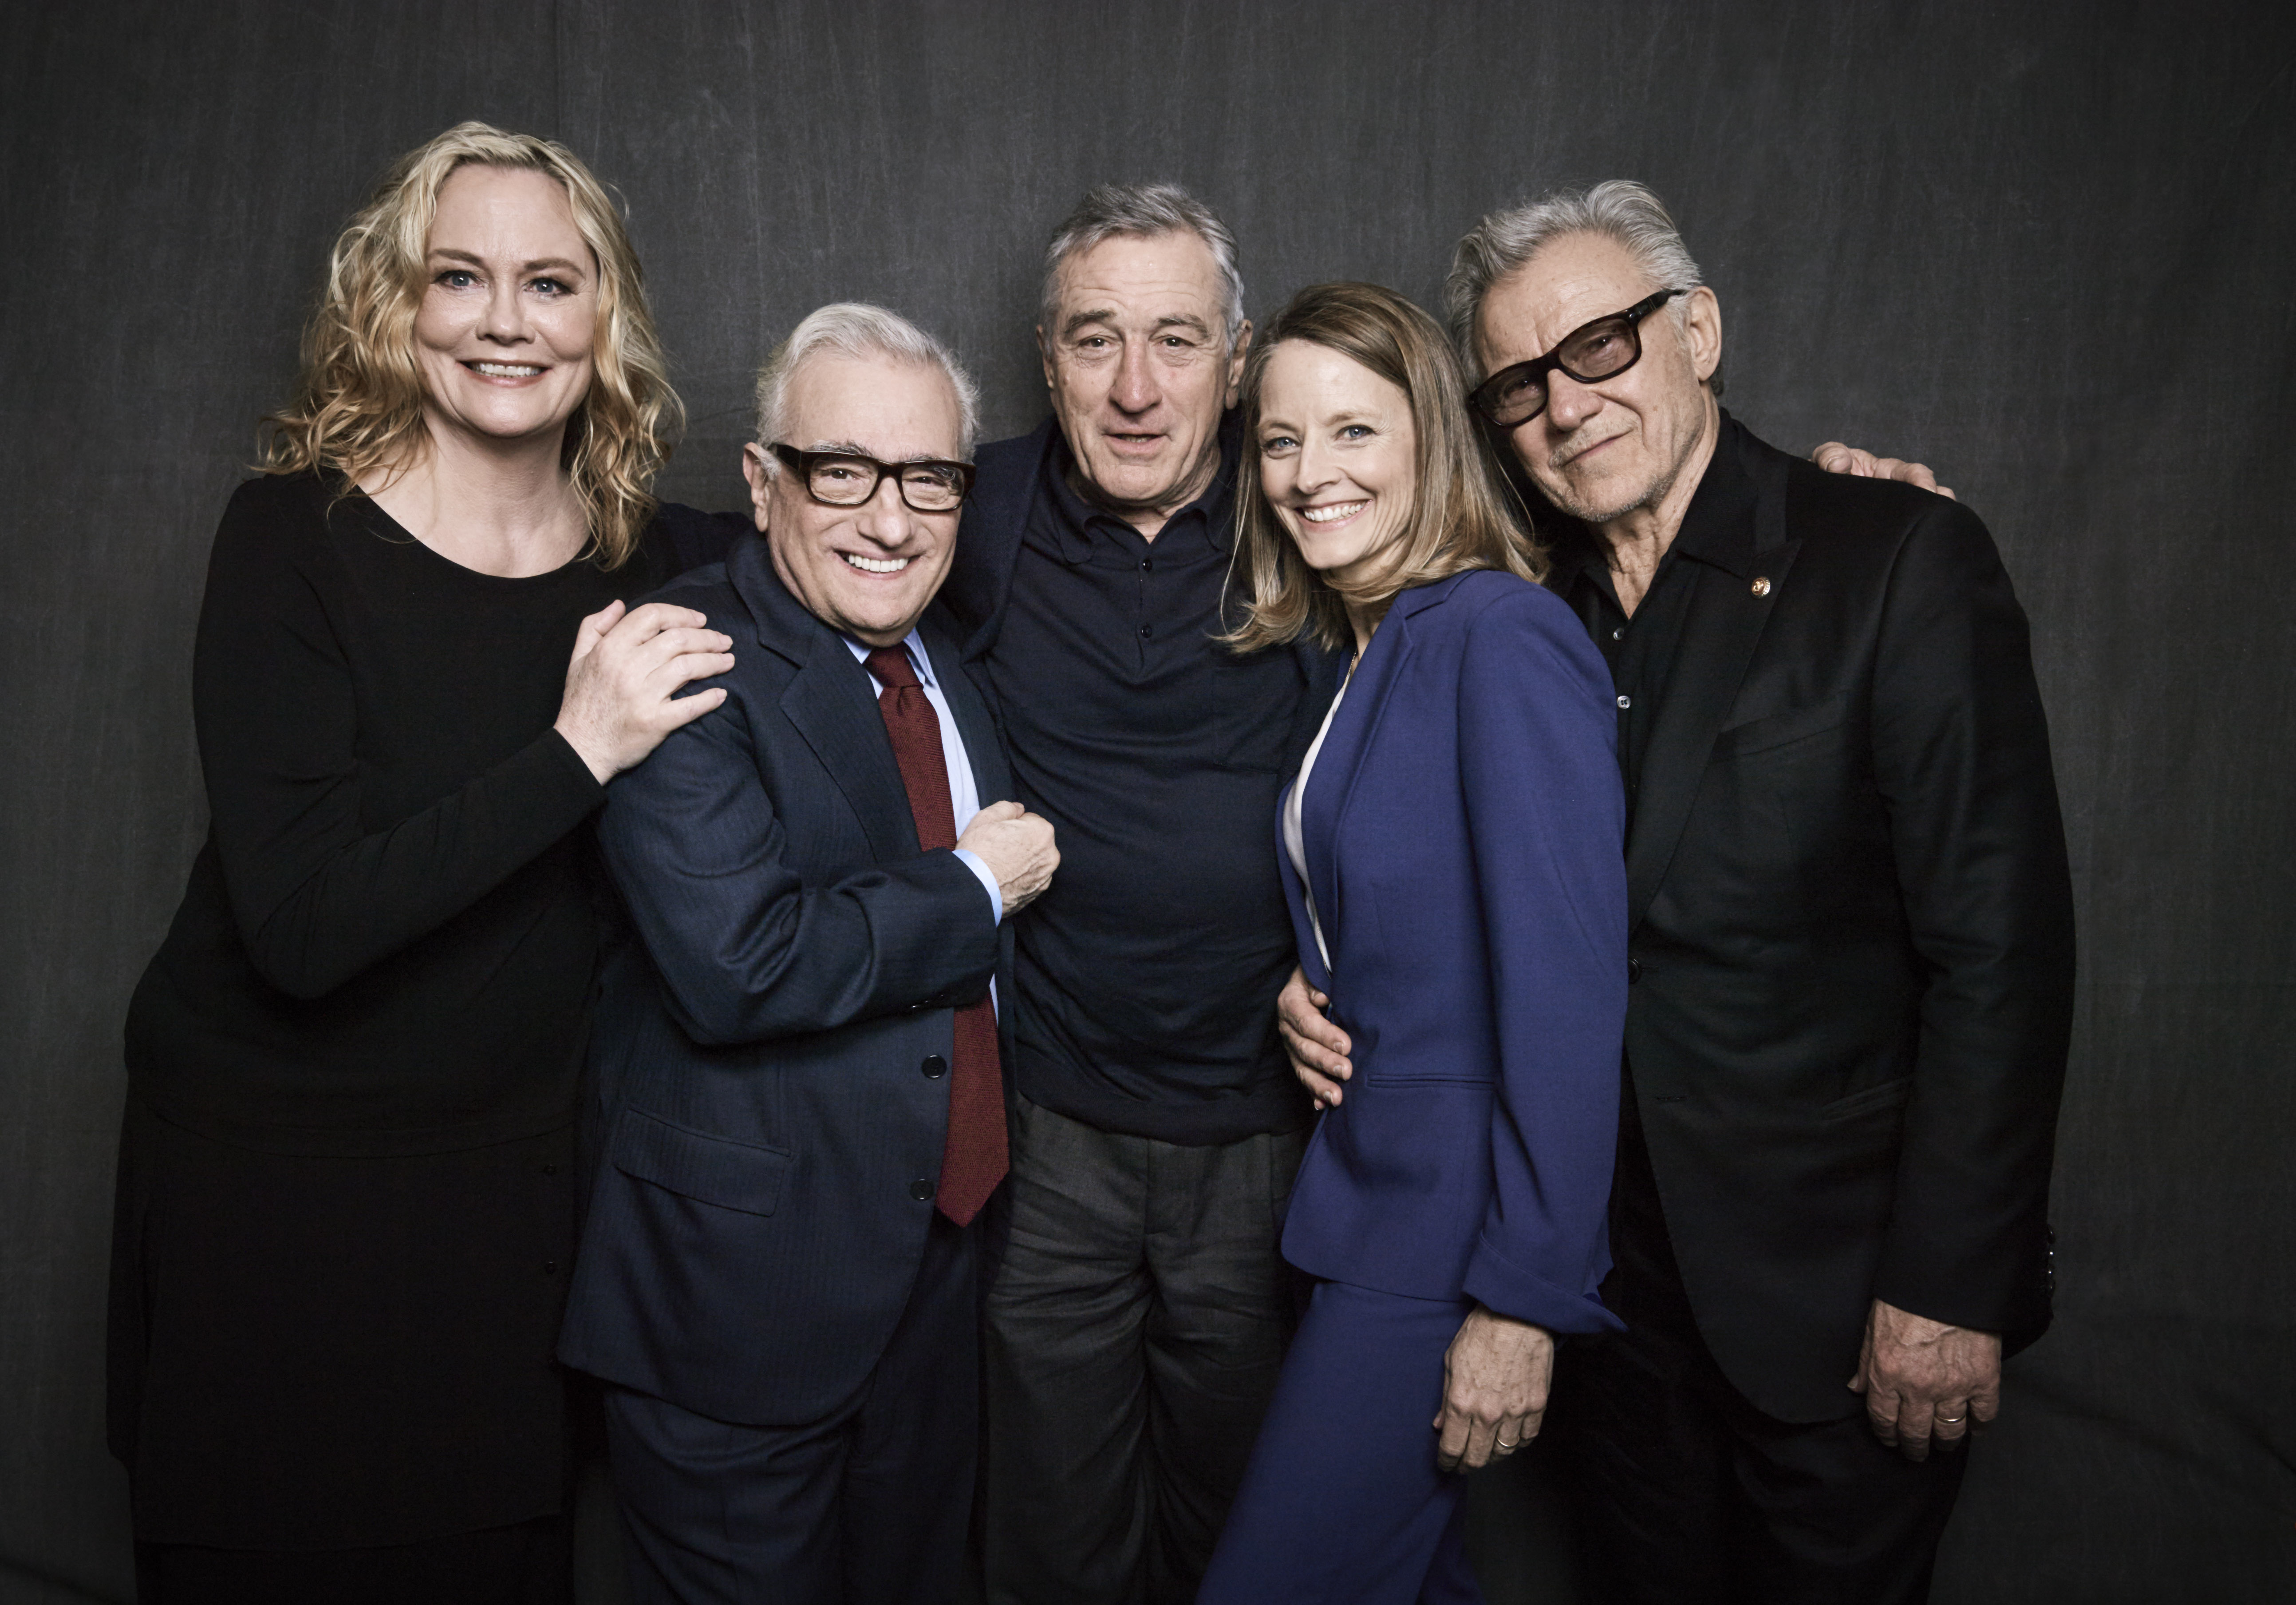 Tribeca 6 things we learned at the 'Taxi Driver' reunion